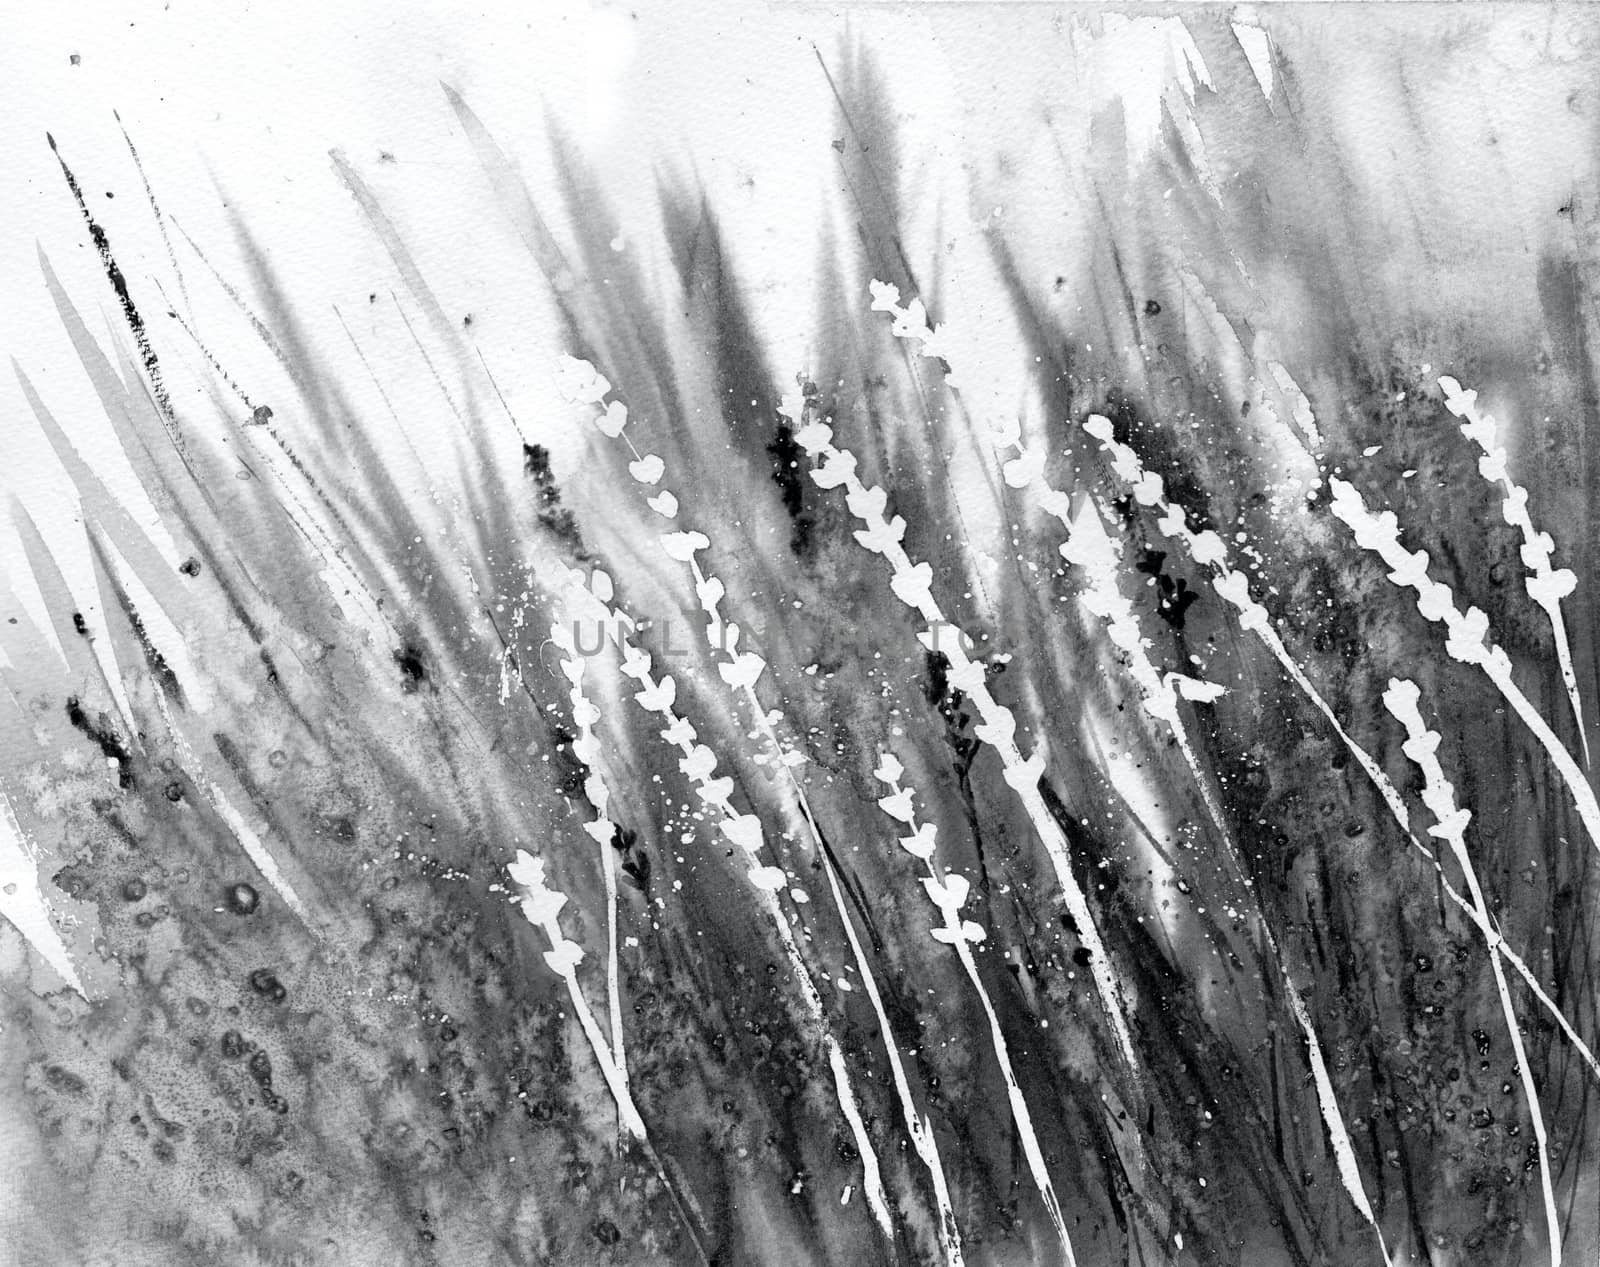 Abstract grass in the wind. Grey, black and white colors. Monochrome background. by sshisshka